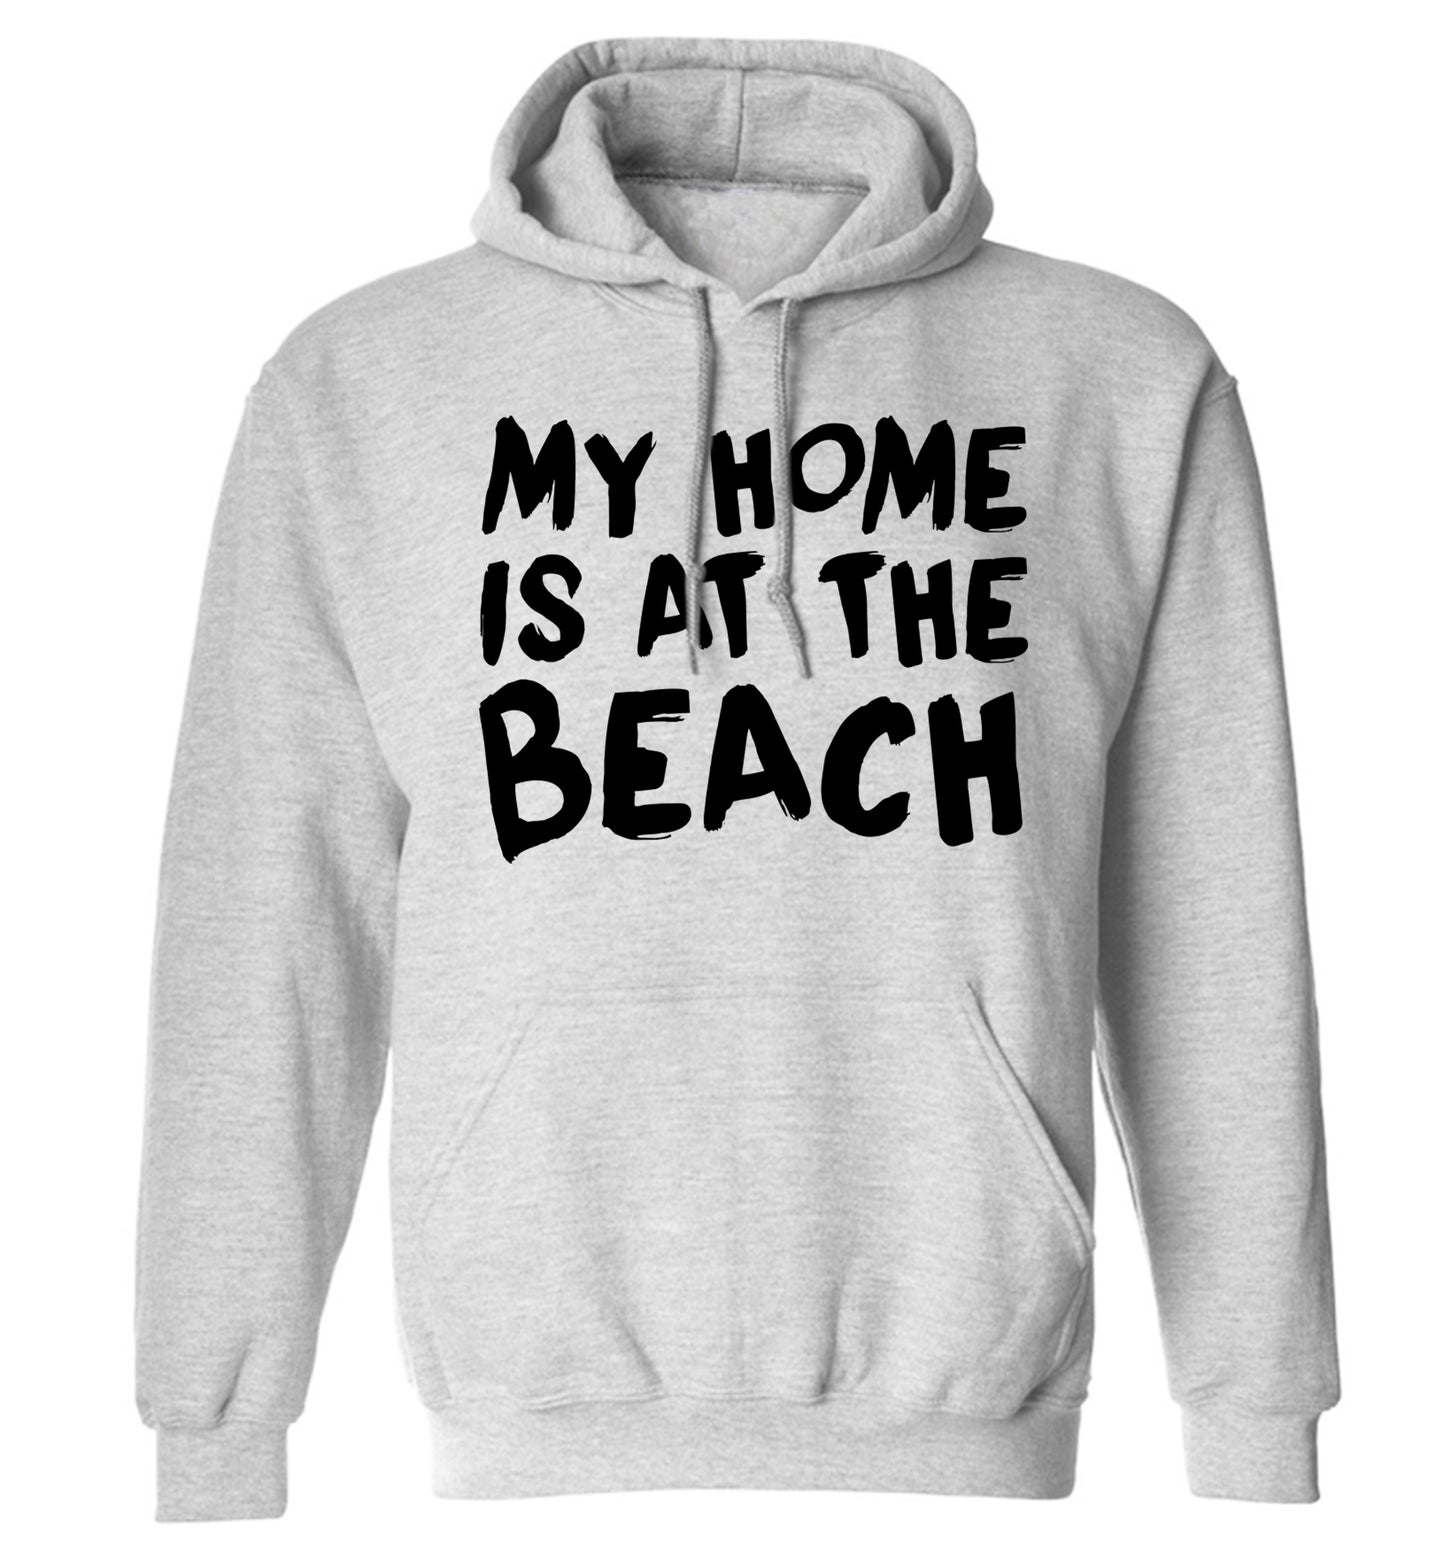 My home is at the beach adults unisex grey hoodie 2XL